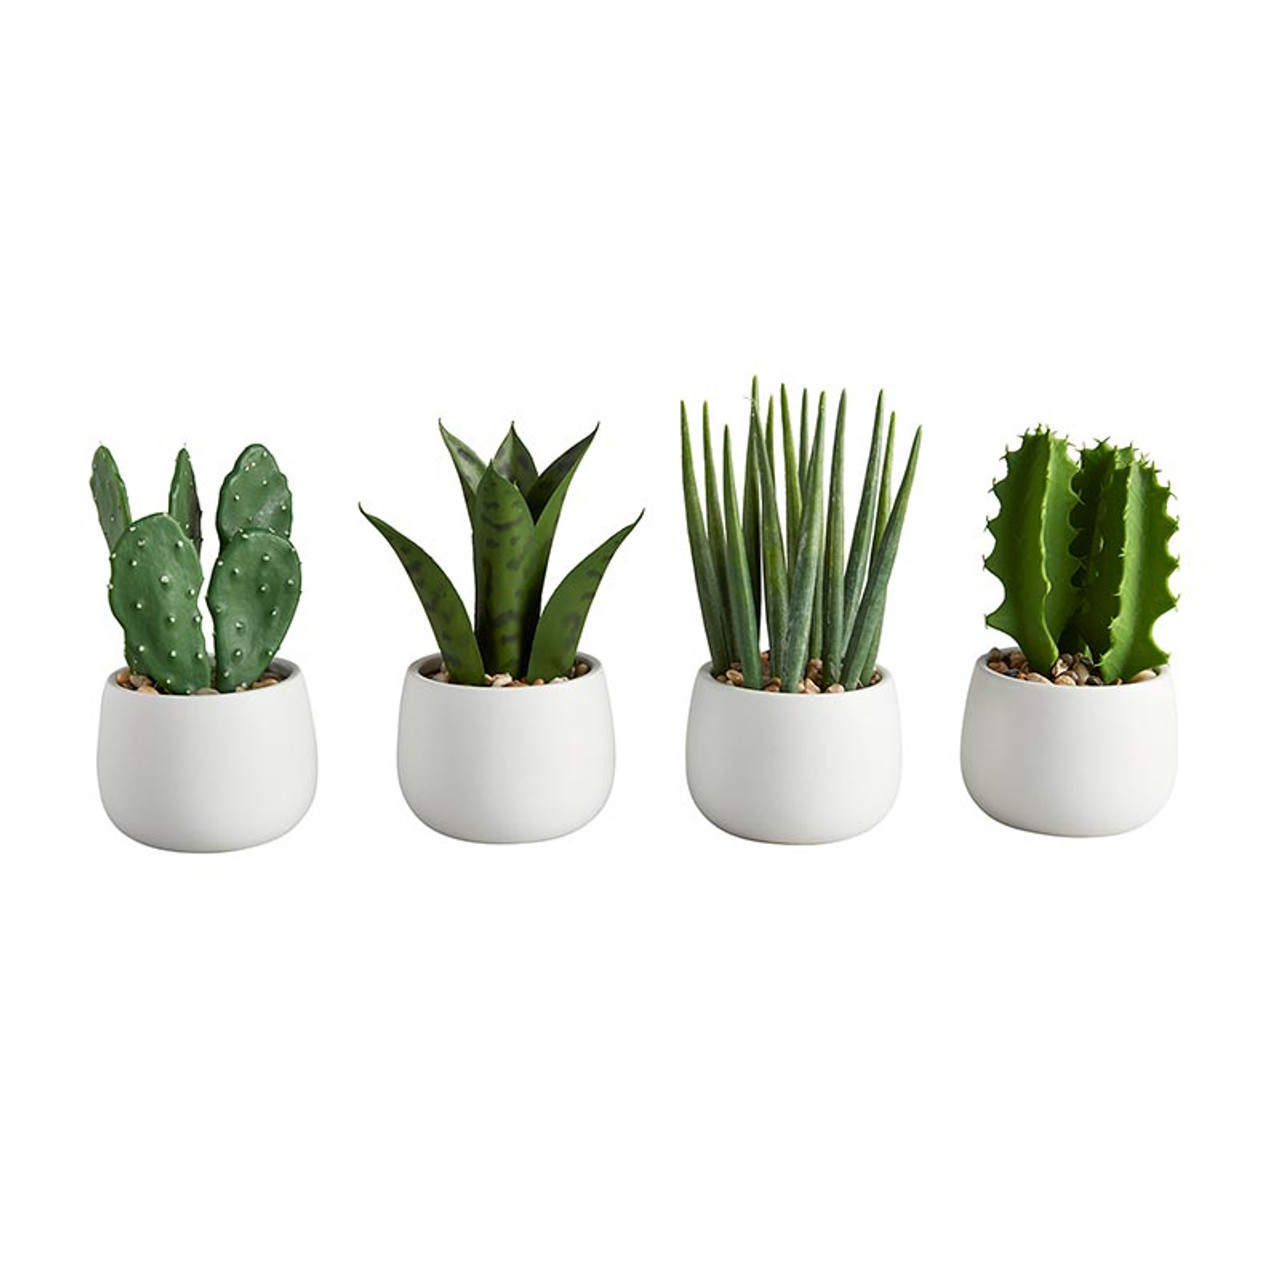 Cactus Measuring Spoons Set in Pot with Stand,Ceramic Cacti